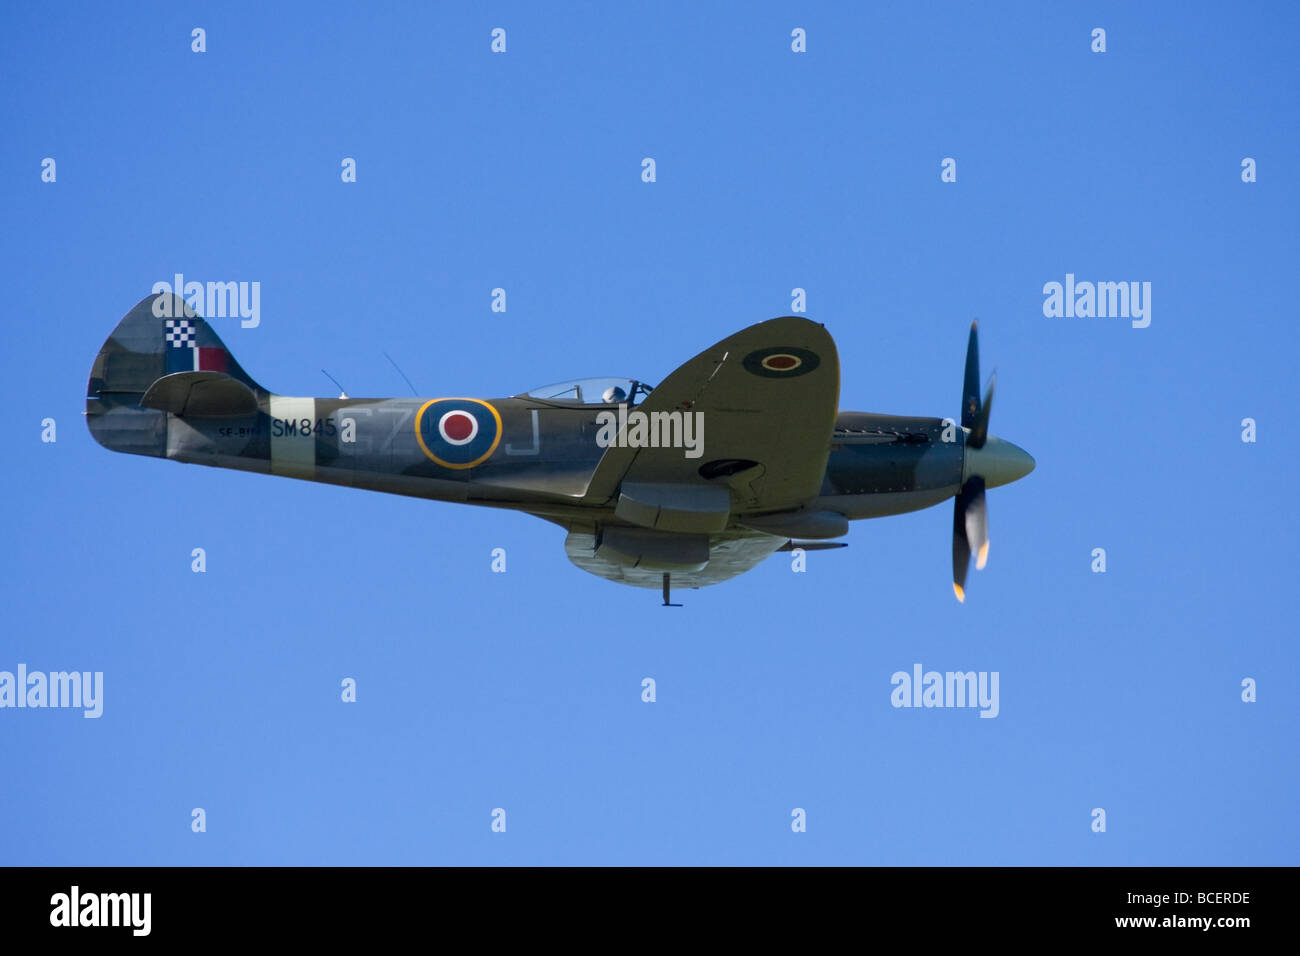 Old Spitfire propeller plane at an airshow Stock Photo